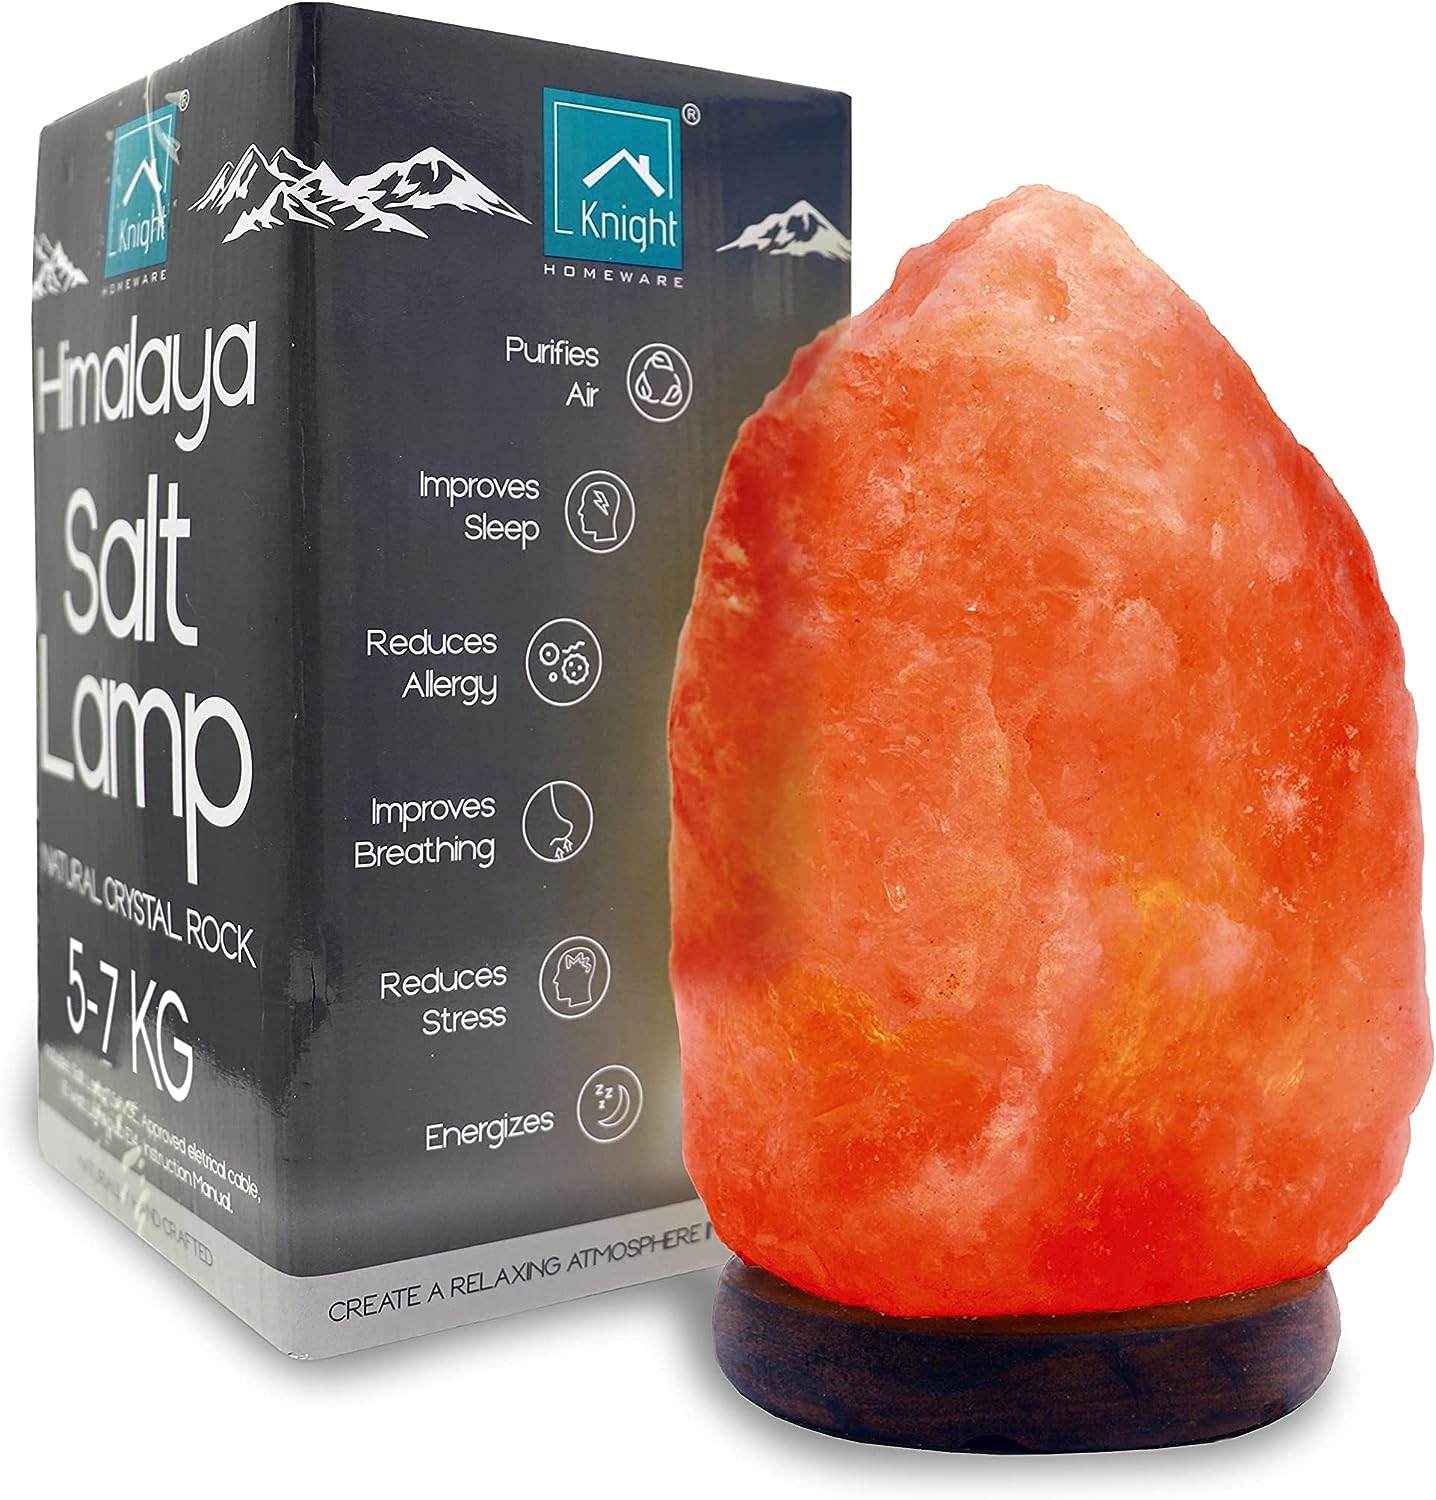 KNIGHT Authentic Himalayan Salt Lamp 5-7 Kg RRP £13.49 CLEARANCE XL £11.99